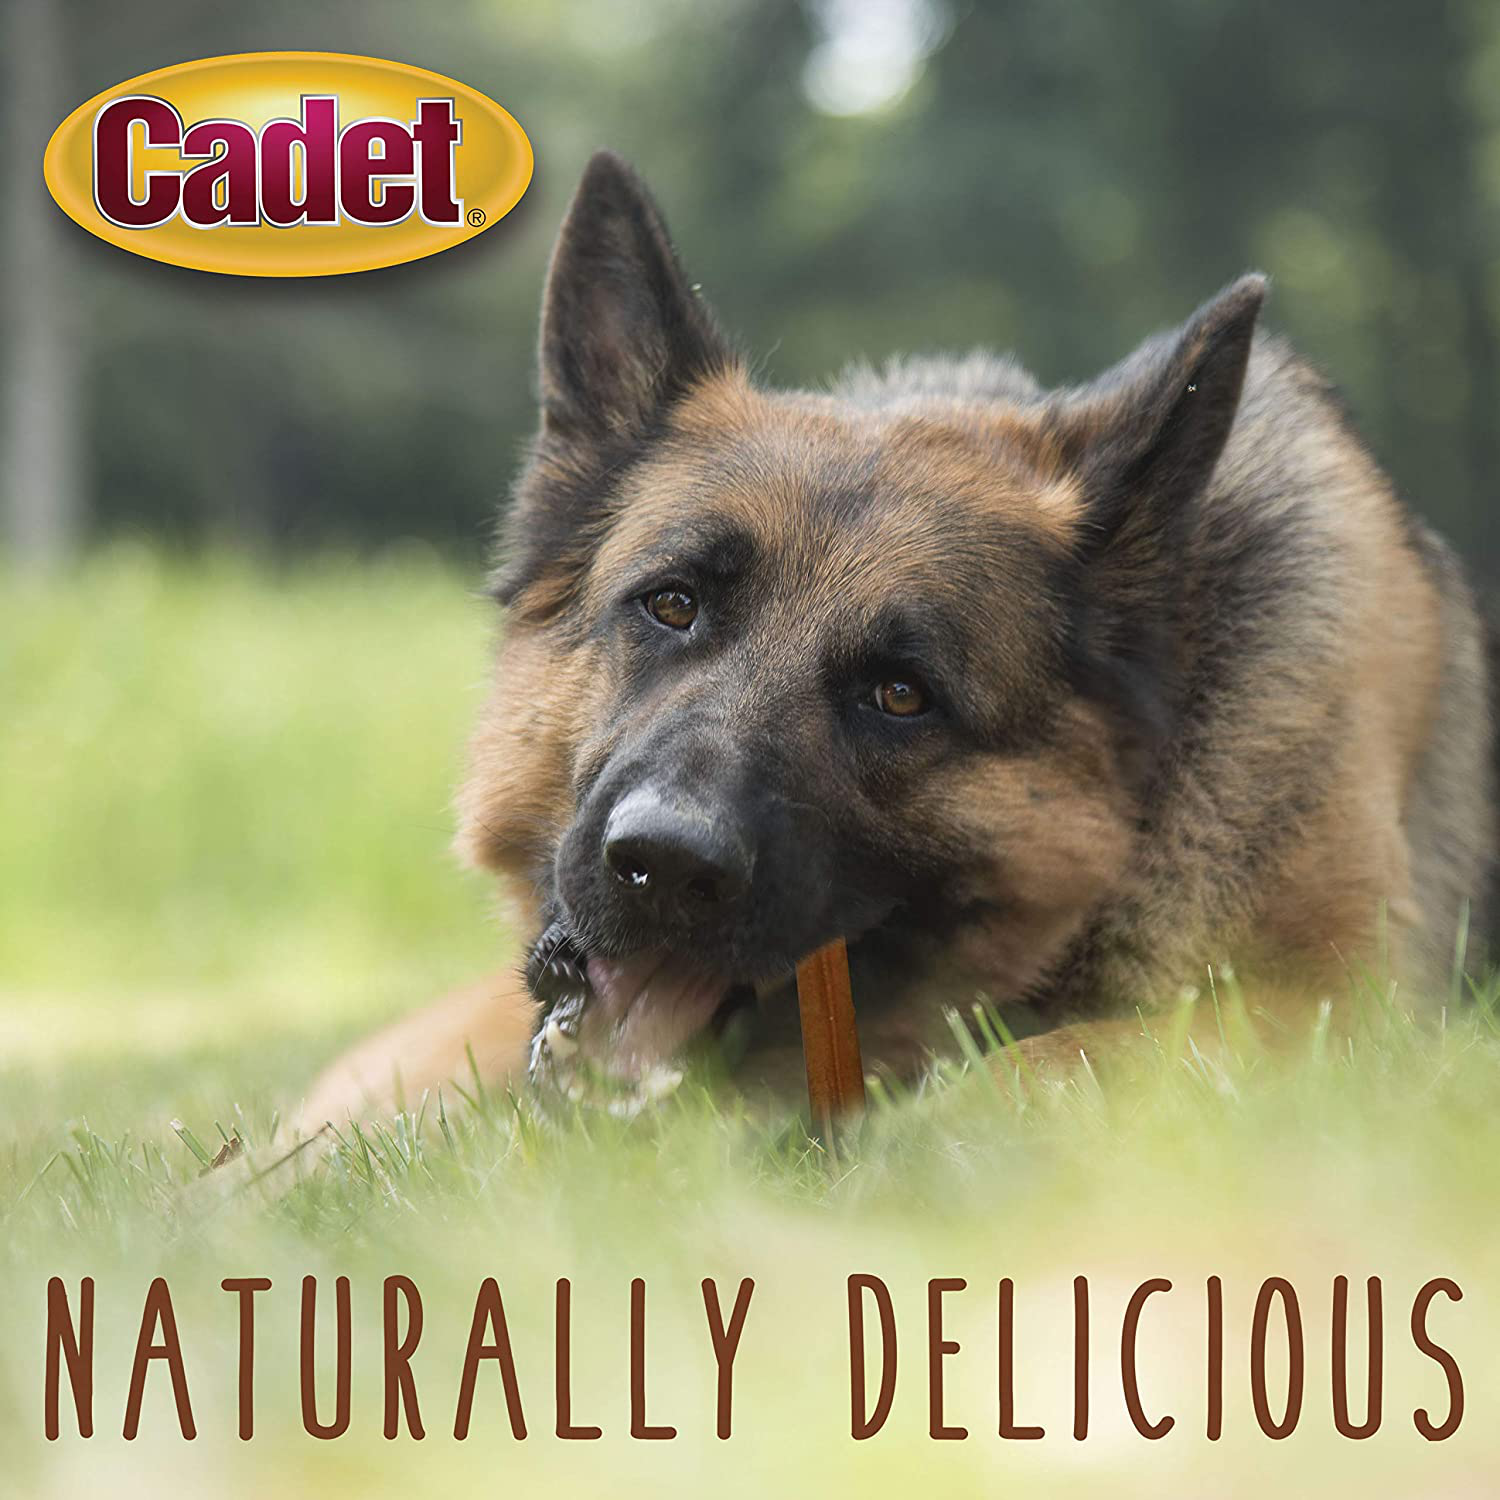 All-Natural, Single-Ingredient Dog Chews